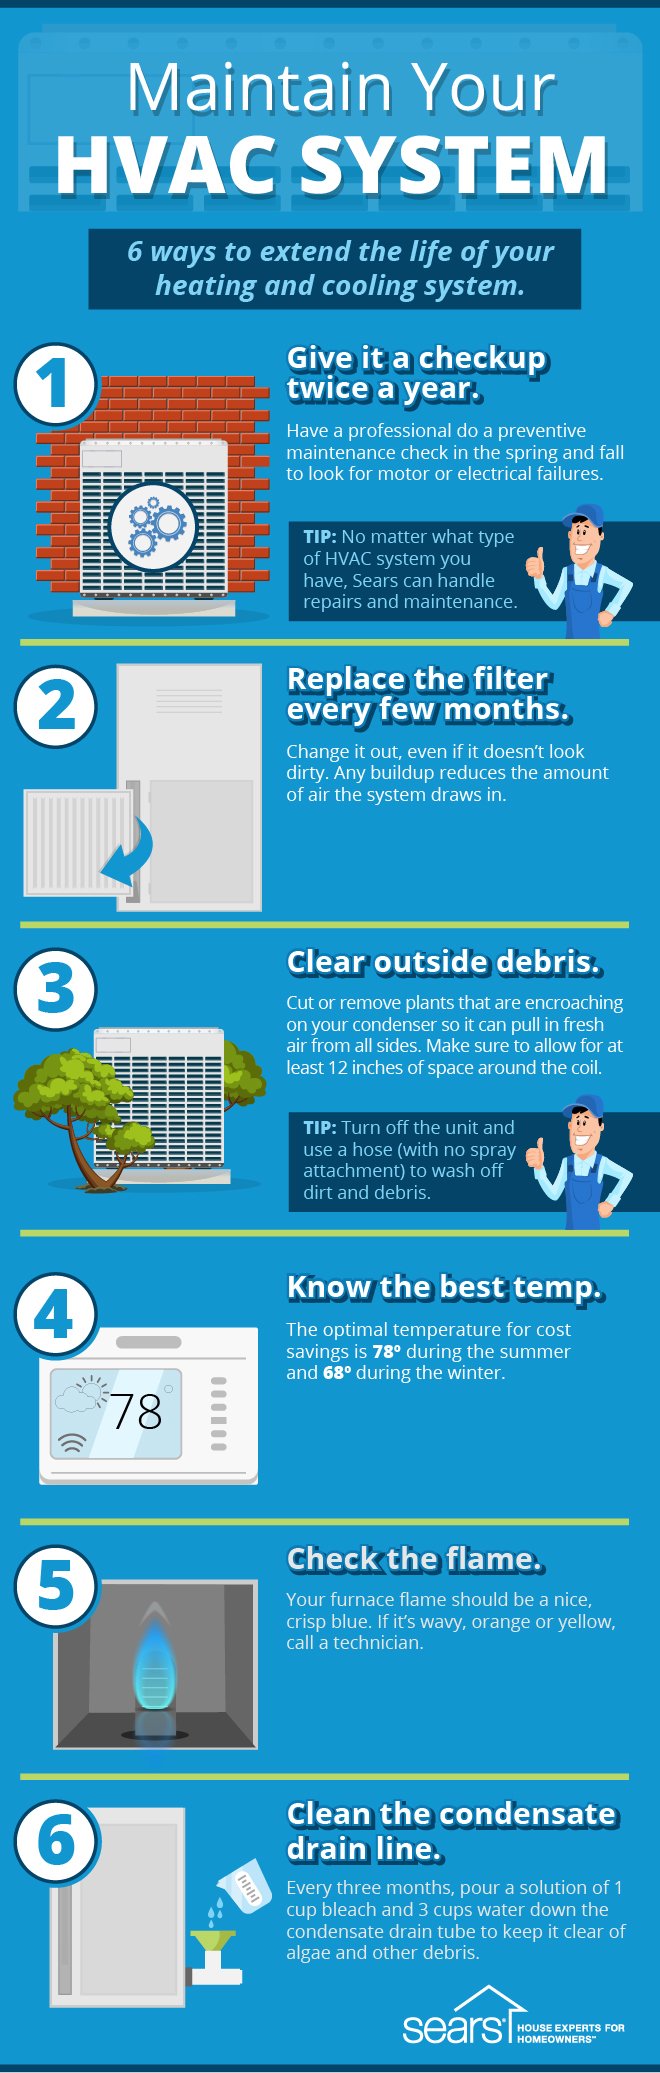 Maintain your HVAC system